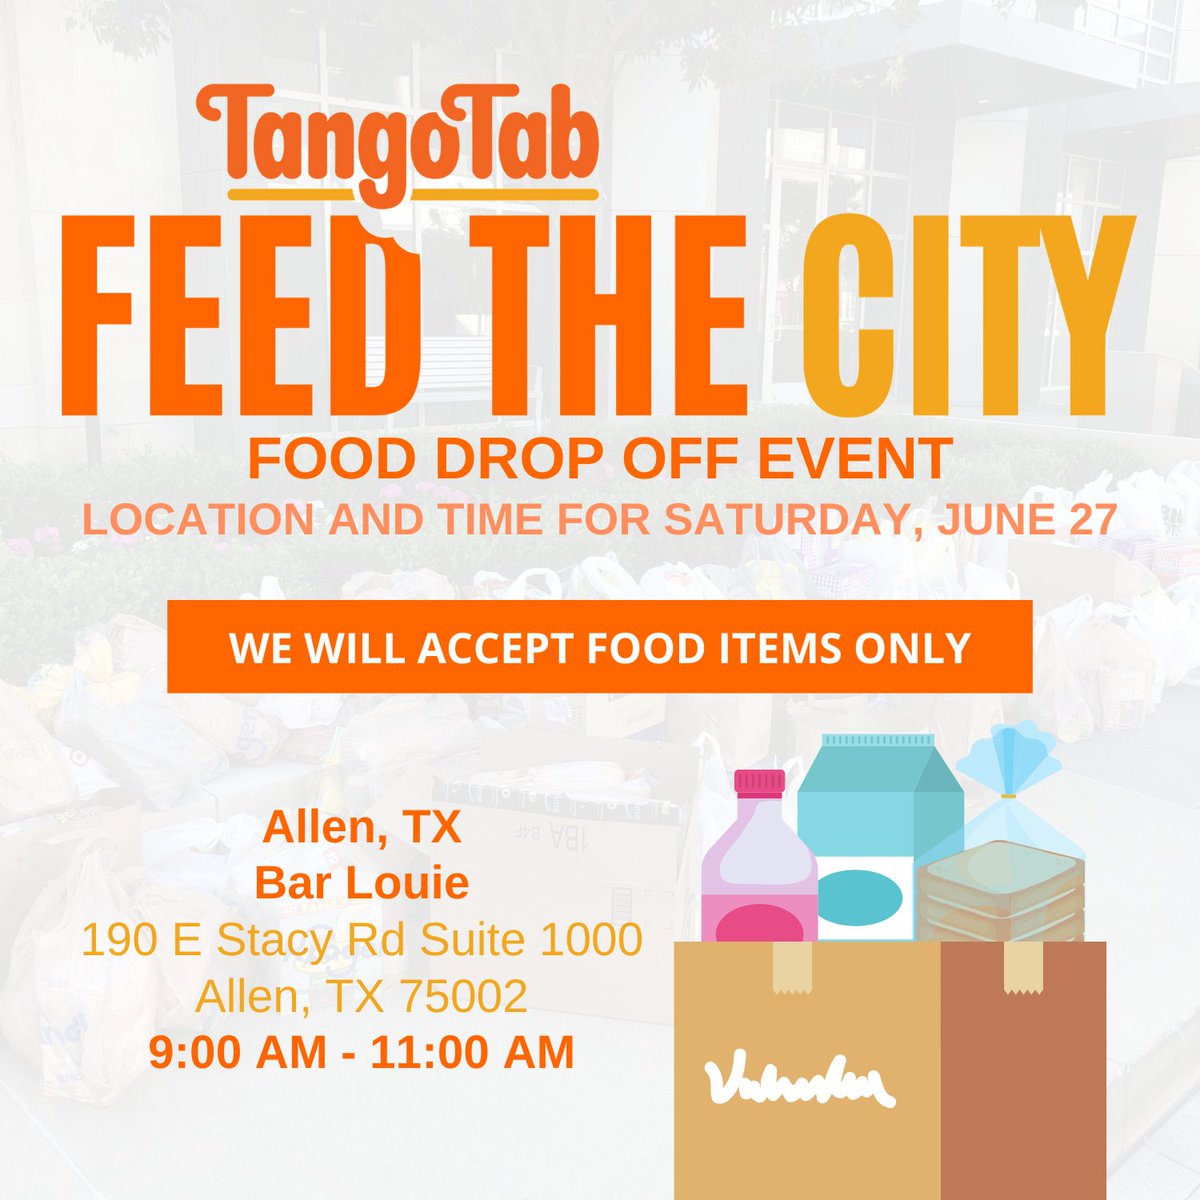 We have two events this Saturday! Deep Ellum will be hosting a regular Feed The City event and Allen will be hosting a drop off.